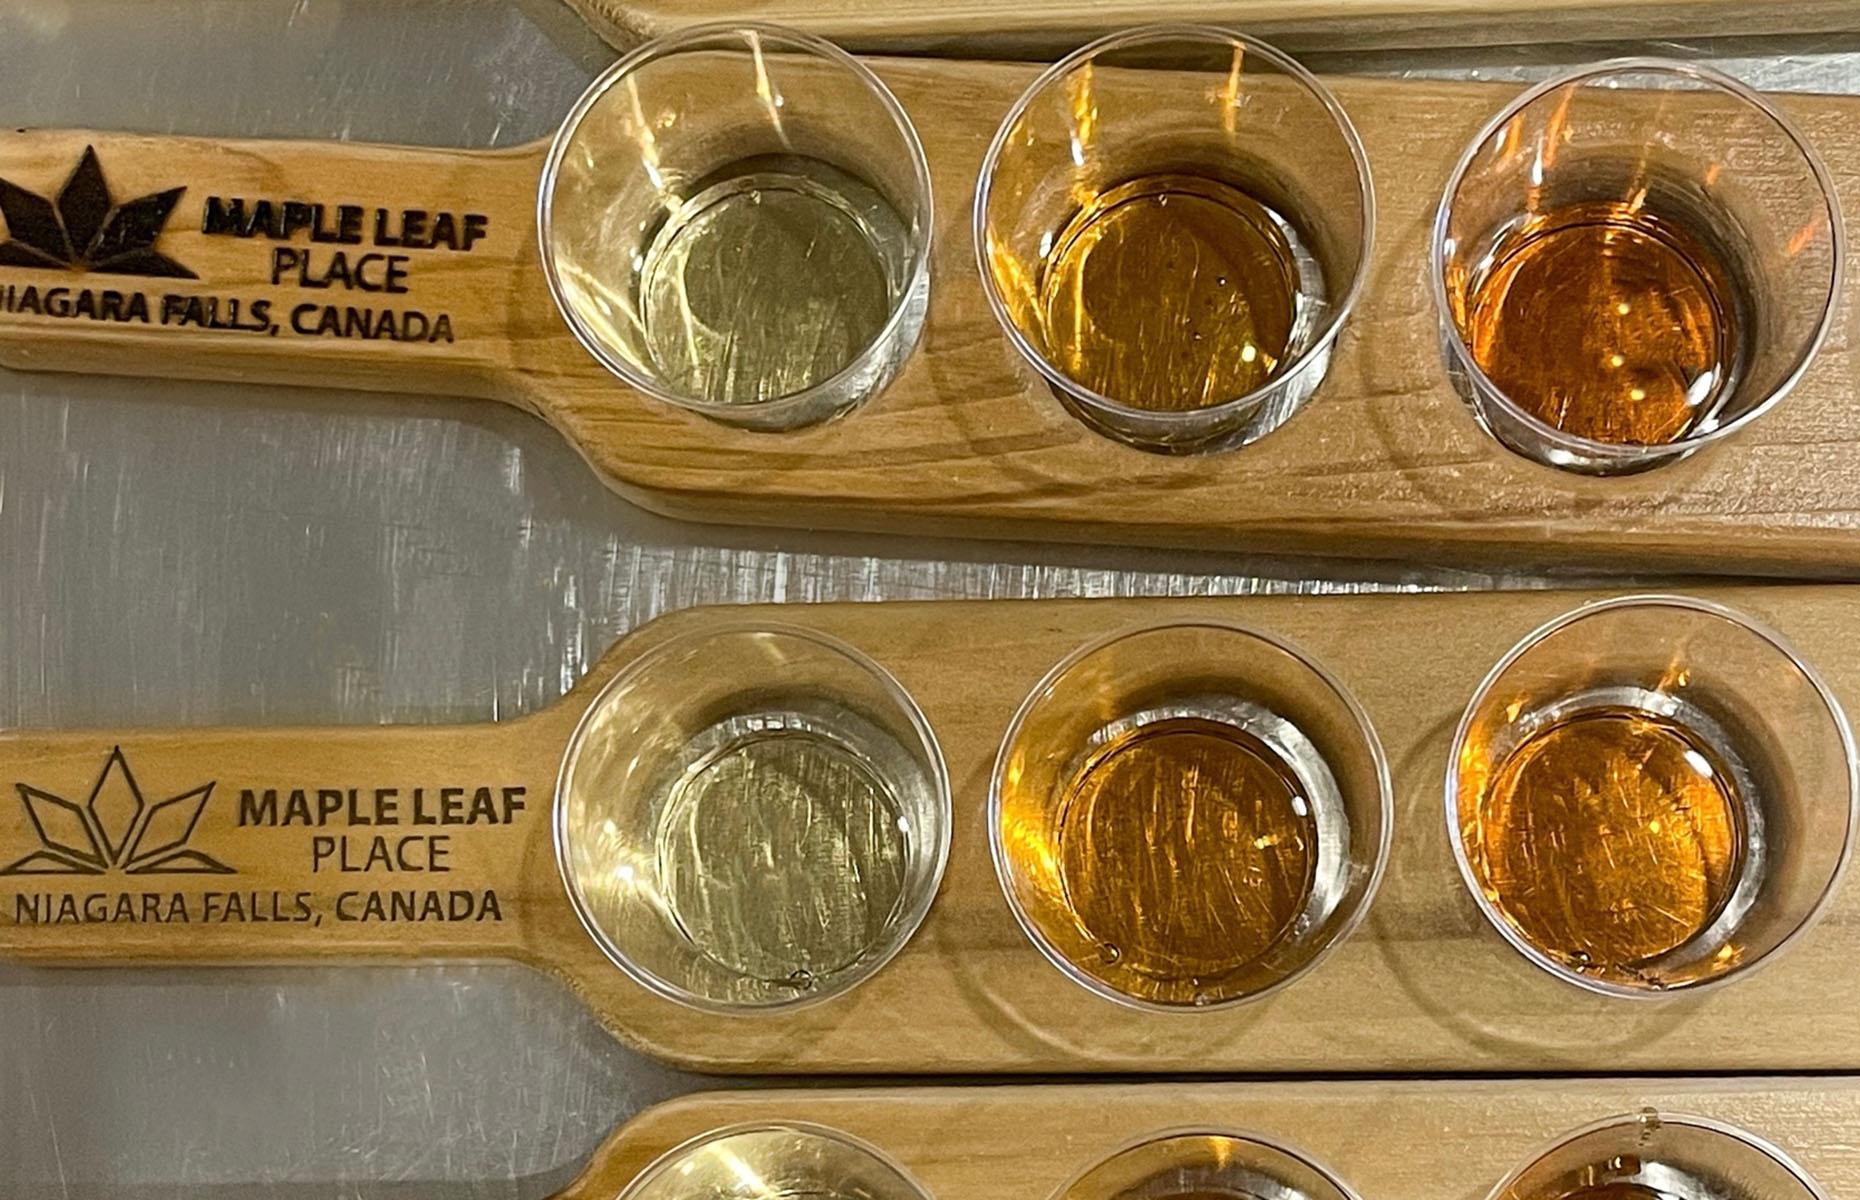 <p>Maple syrup tasting will give you a sweetness craving you didn’t know you had. Head to <a href="https://www.mapleleafplace.ca/">Maple Leaf Place</a> on River Road for a free tasting. Flights of three different varieties of maple syrup allow you to decide on your favourite – then you can buy some to take home. Taste golden, which is from the first harvest; amber, which represents mid harvest; and dark, from the final harvest.</p>  <p>A word of warning: they’re all delicious. Before you leave, pick up a souvenir in the gift shop and pose with the giant toy moose.</p>